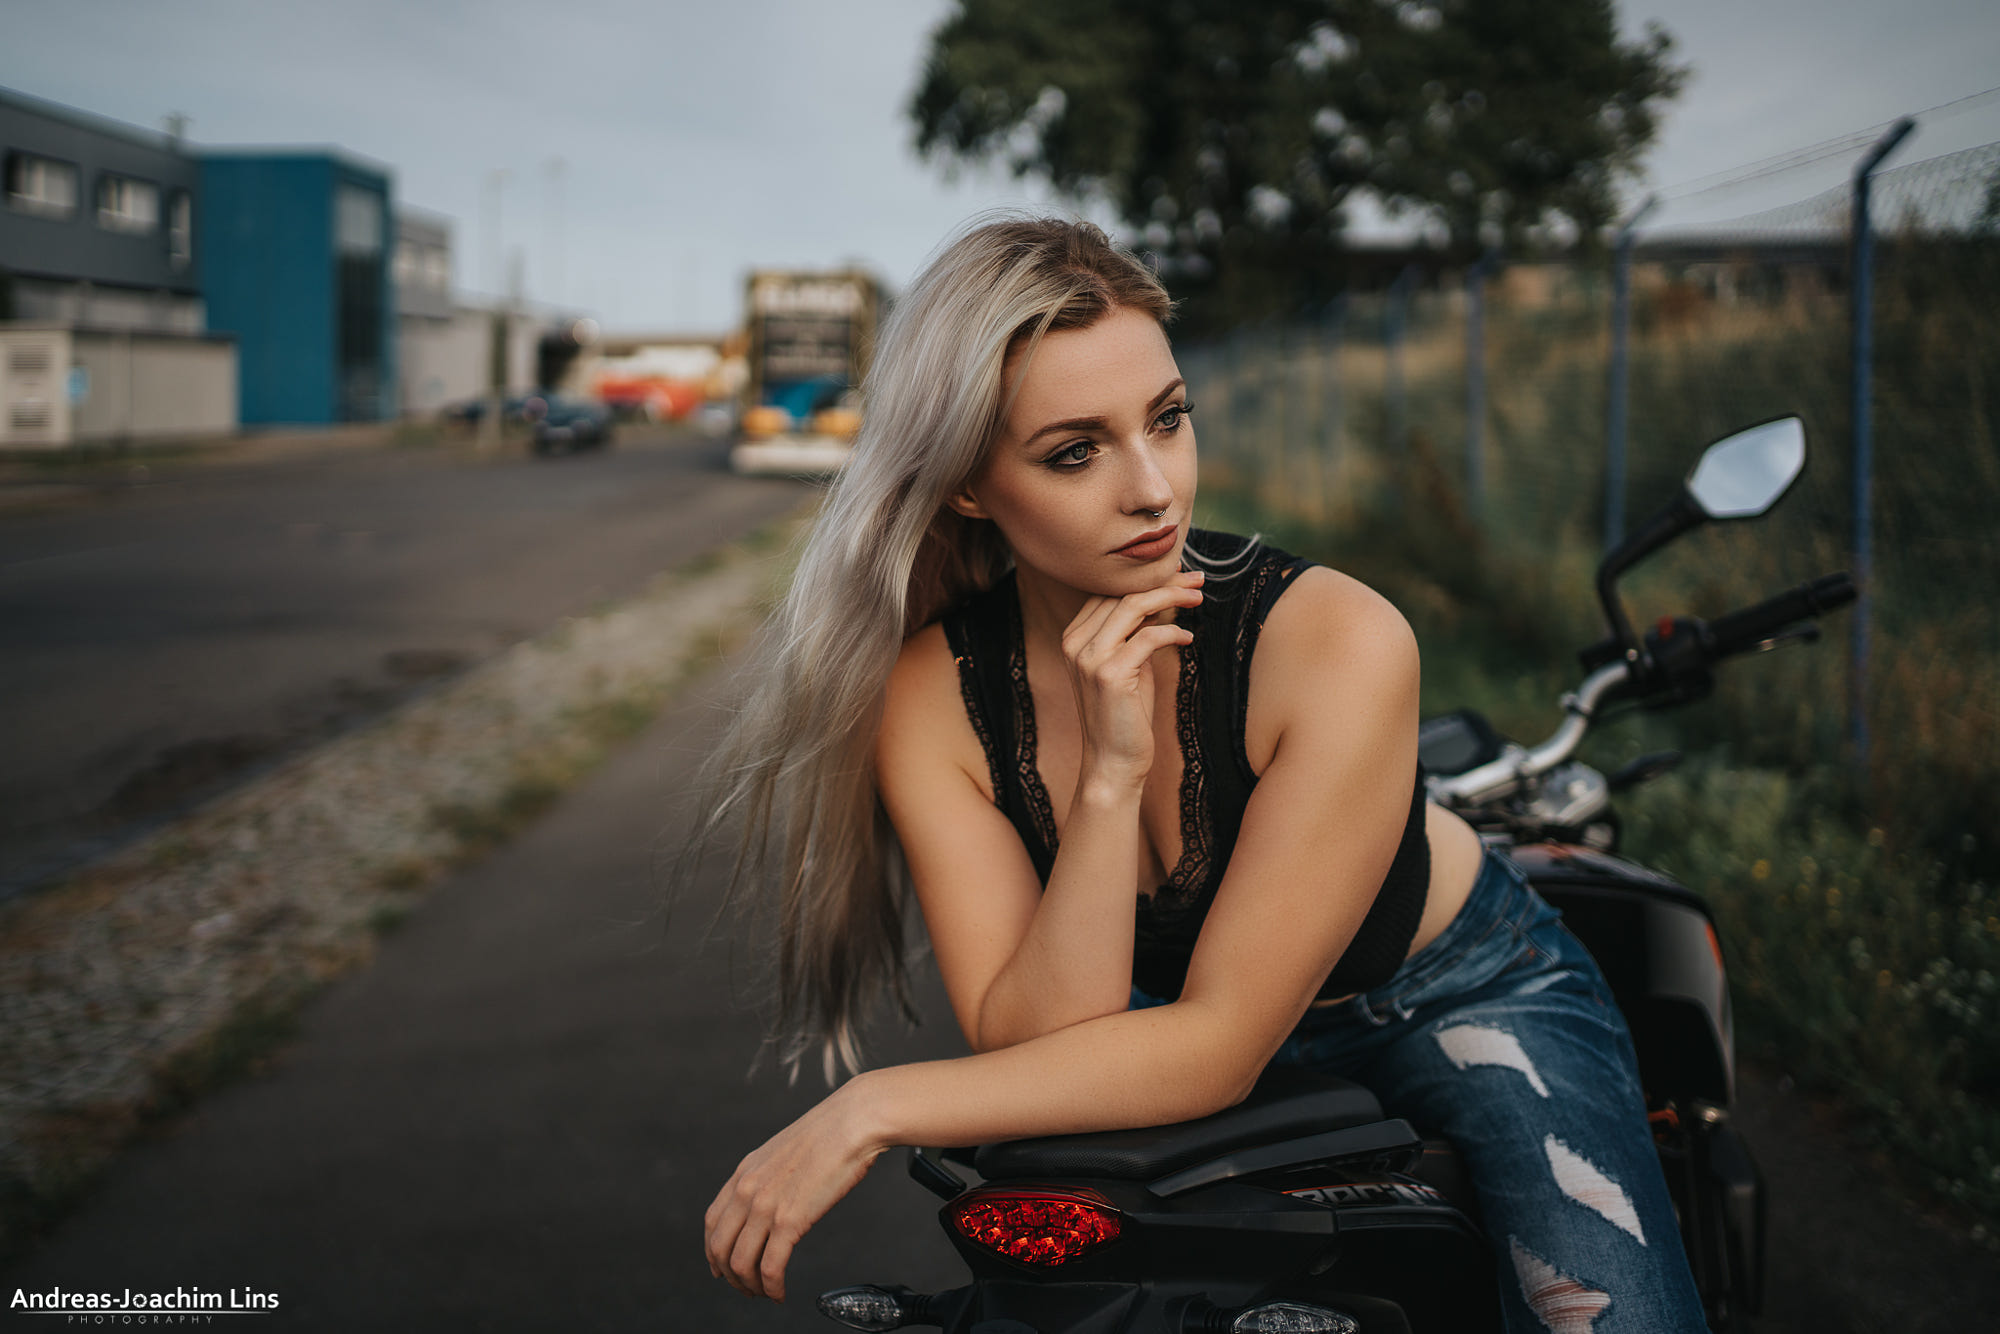 Women Long Hair Torn Jeans Women With Motorcycles Nose Ring Brunette Andreas Joachim Lins Women Outd 2000x1334